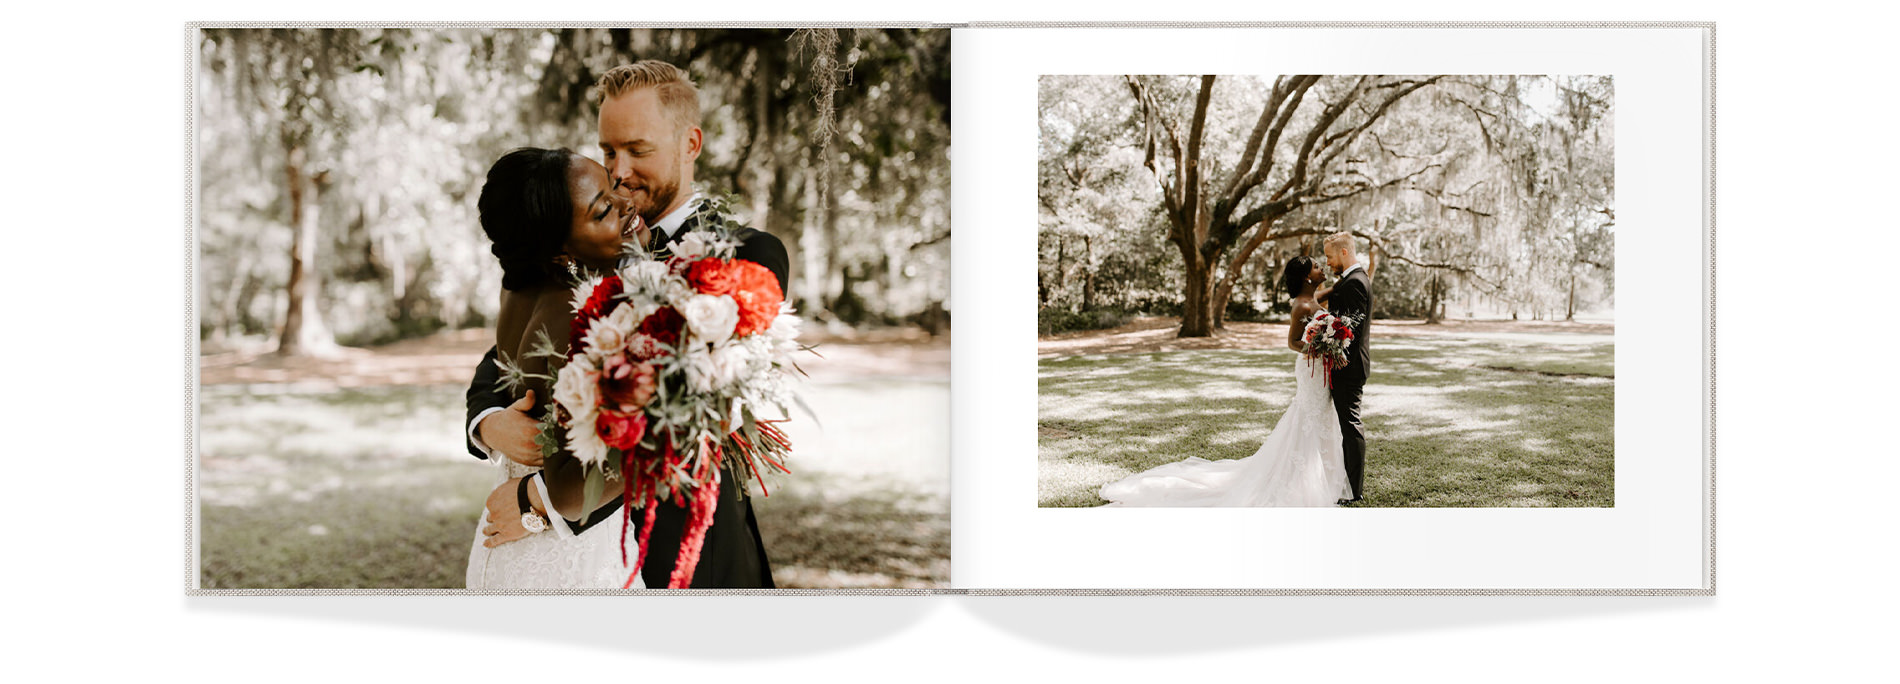 newlywed portraits with striking red and white flower bouquet